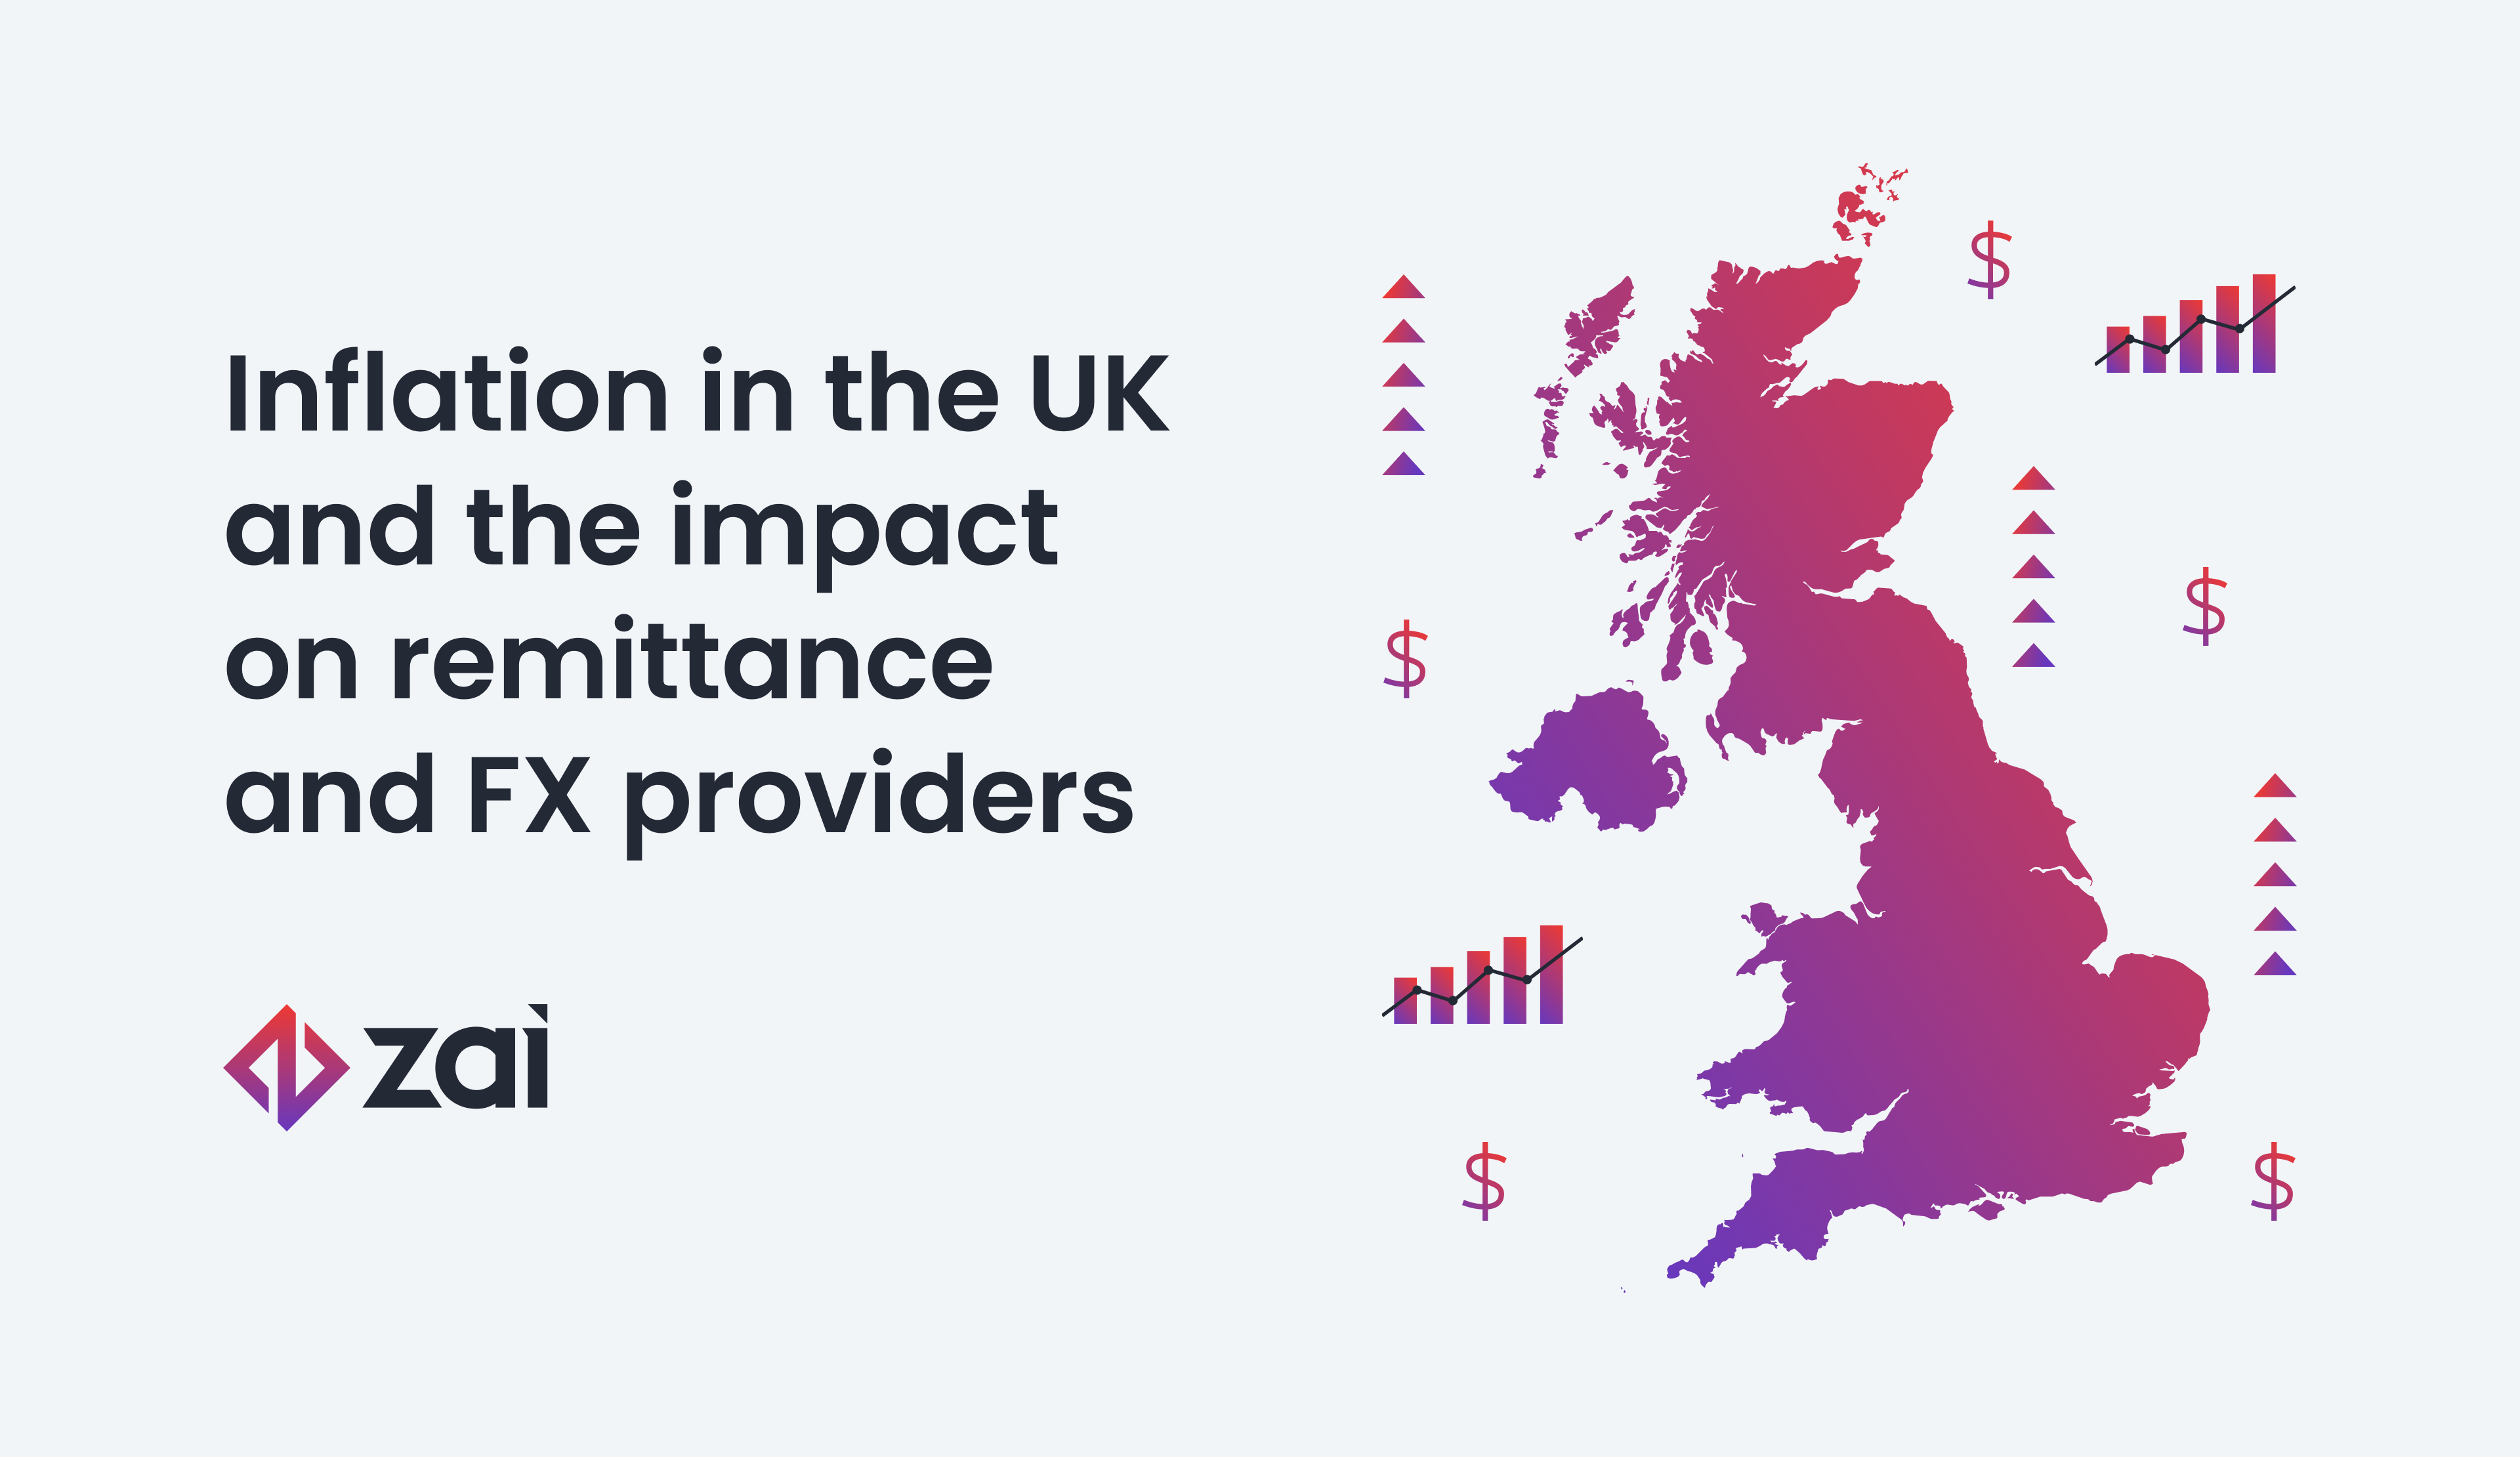 Impact of inflation on remittance and FX in the UK